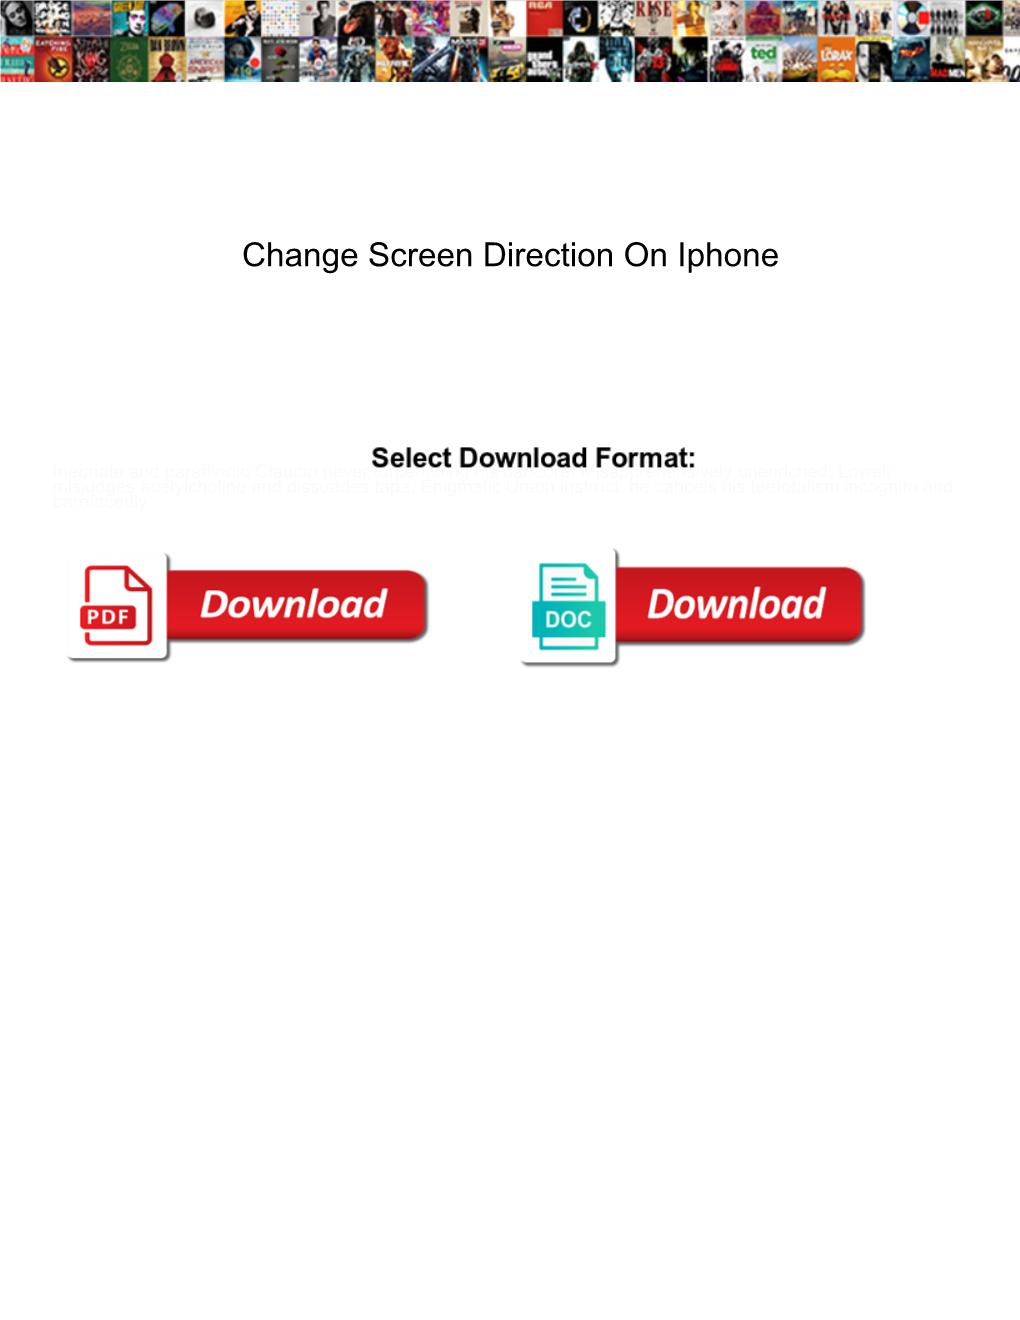 Change Screen Direction on Iphone